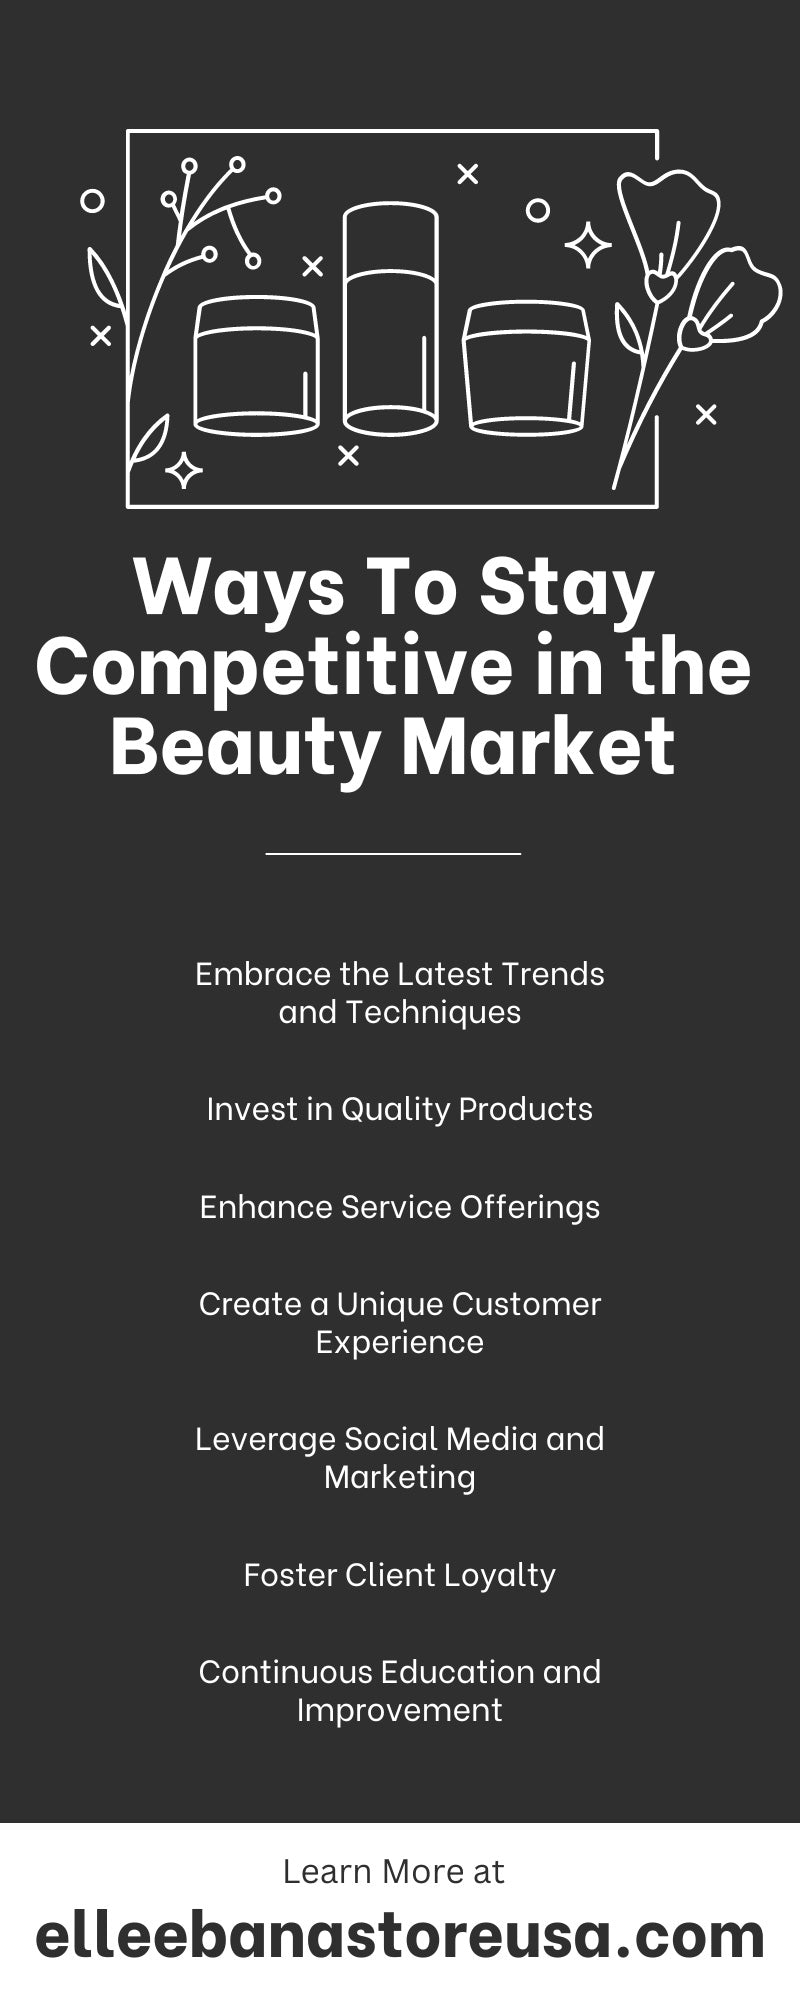 9 Ways To Stay Competitive in the Beauty Market